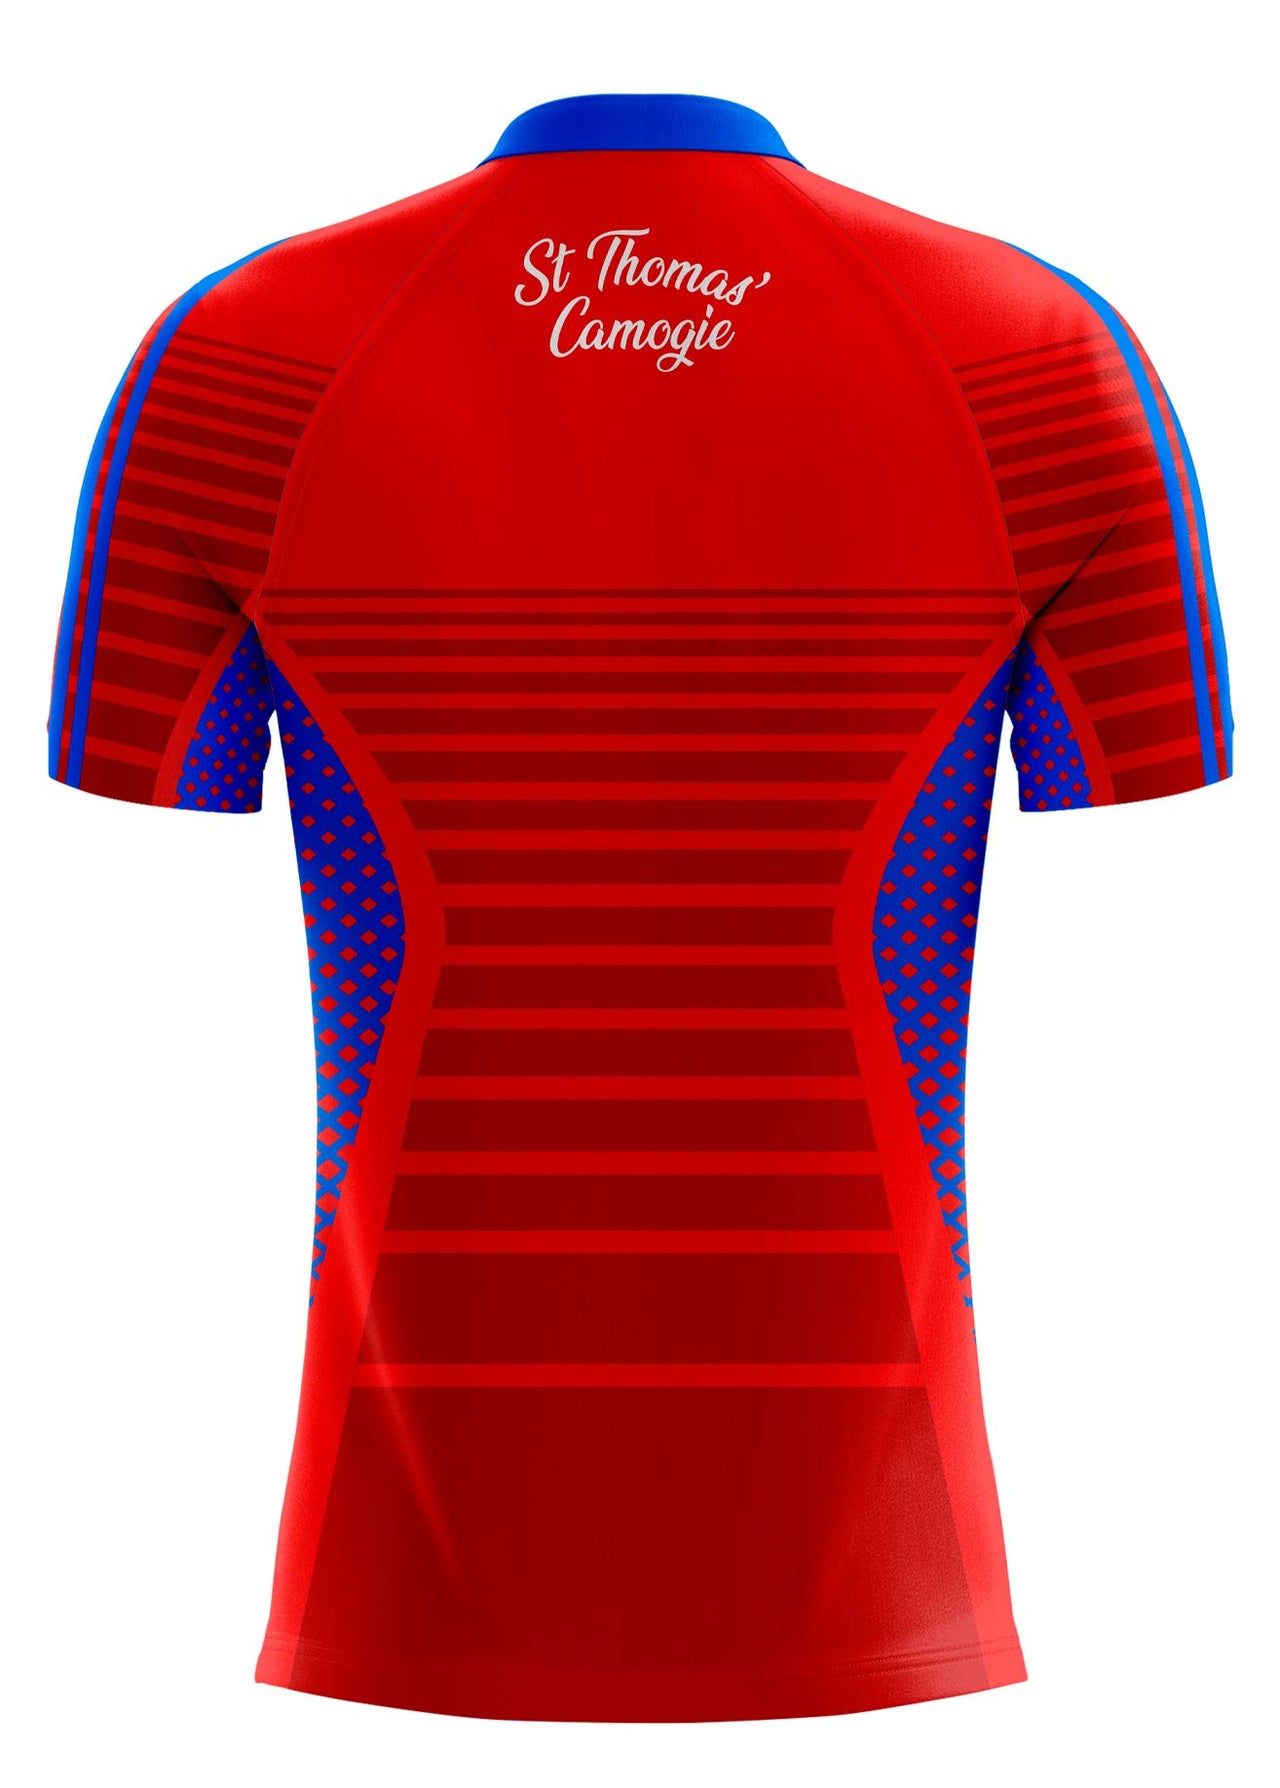 St Thomas' Camogie Home Jersey Regular Fit Adult